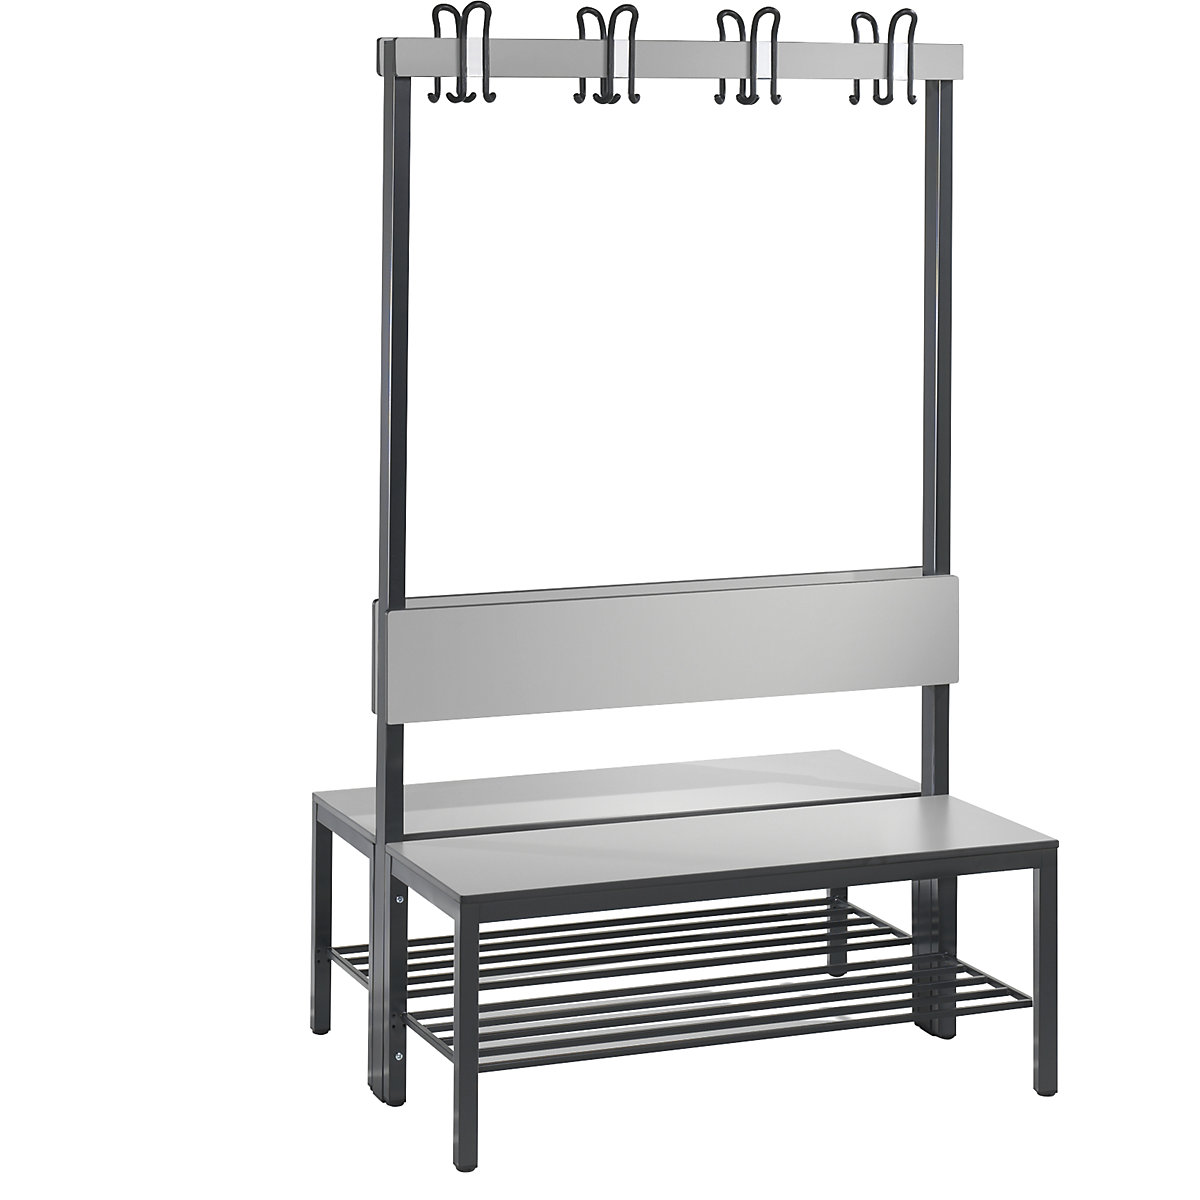 BASIC PLUS cloakroom bench, double sided – C+P